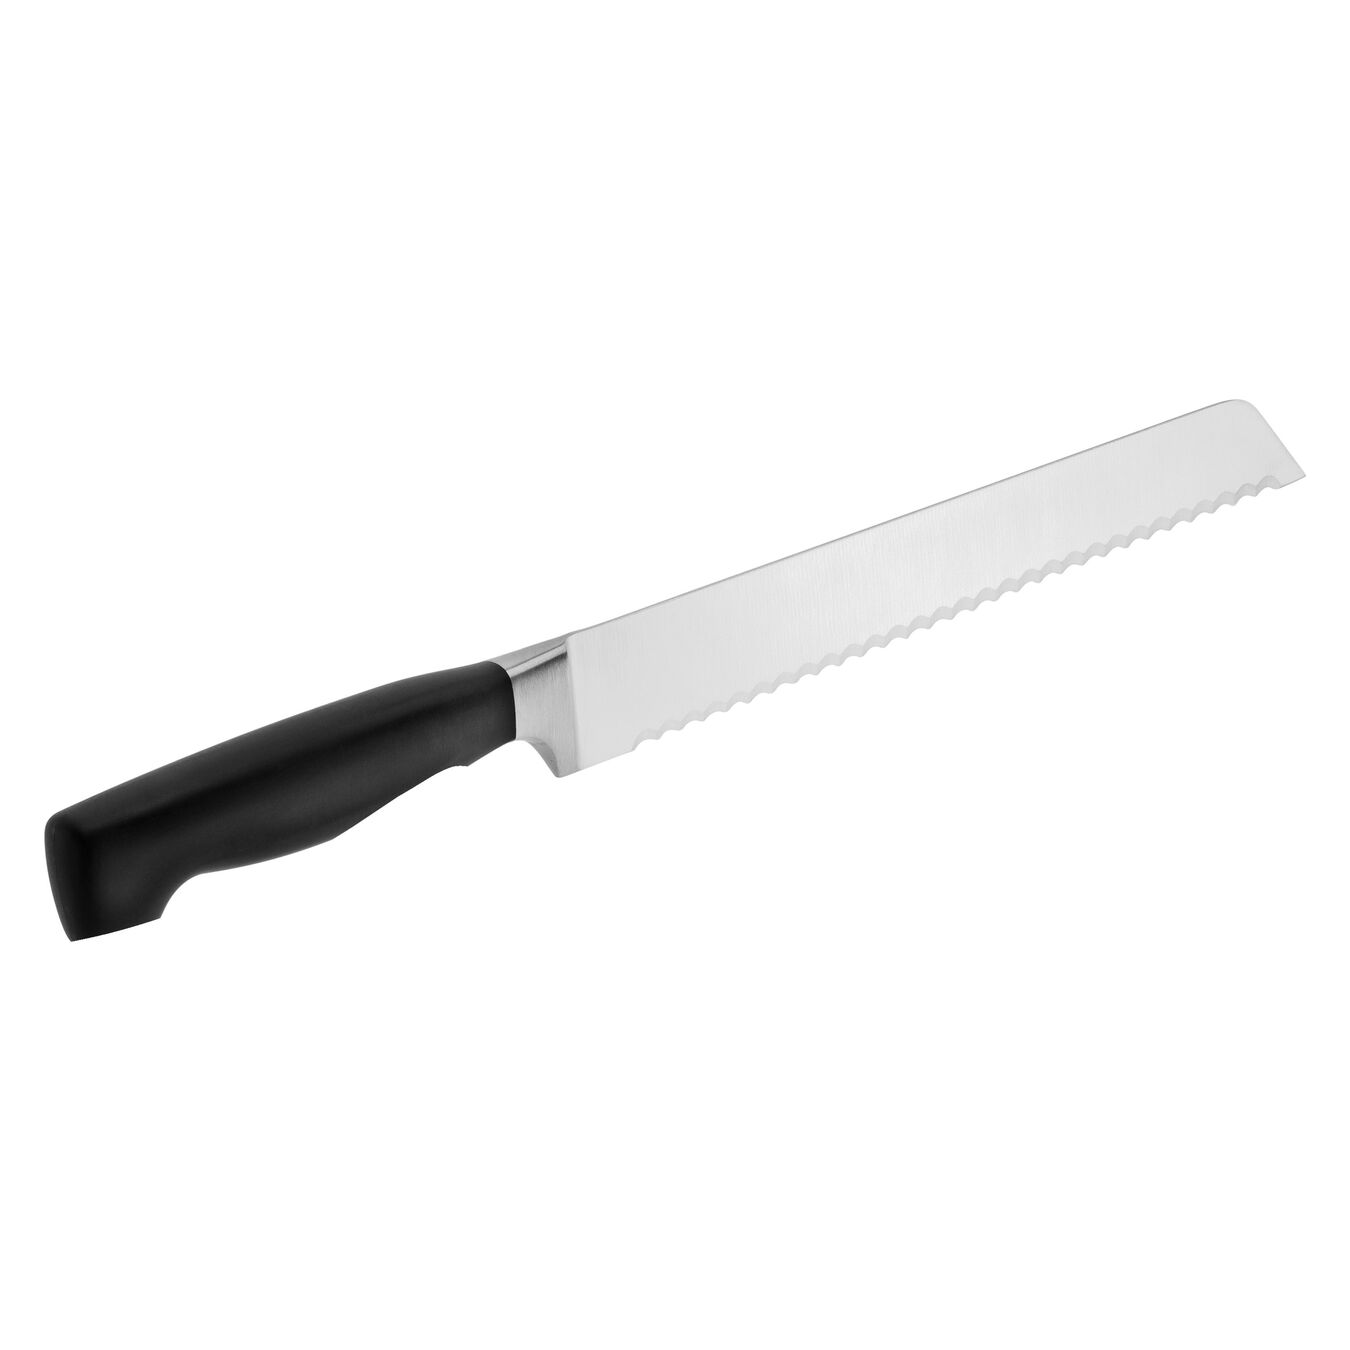 8 inch Bread knife,,large 2